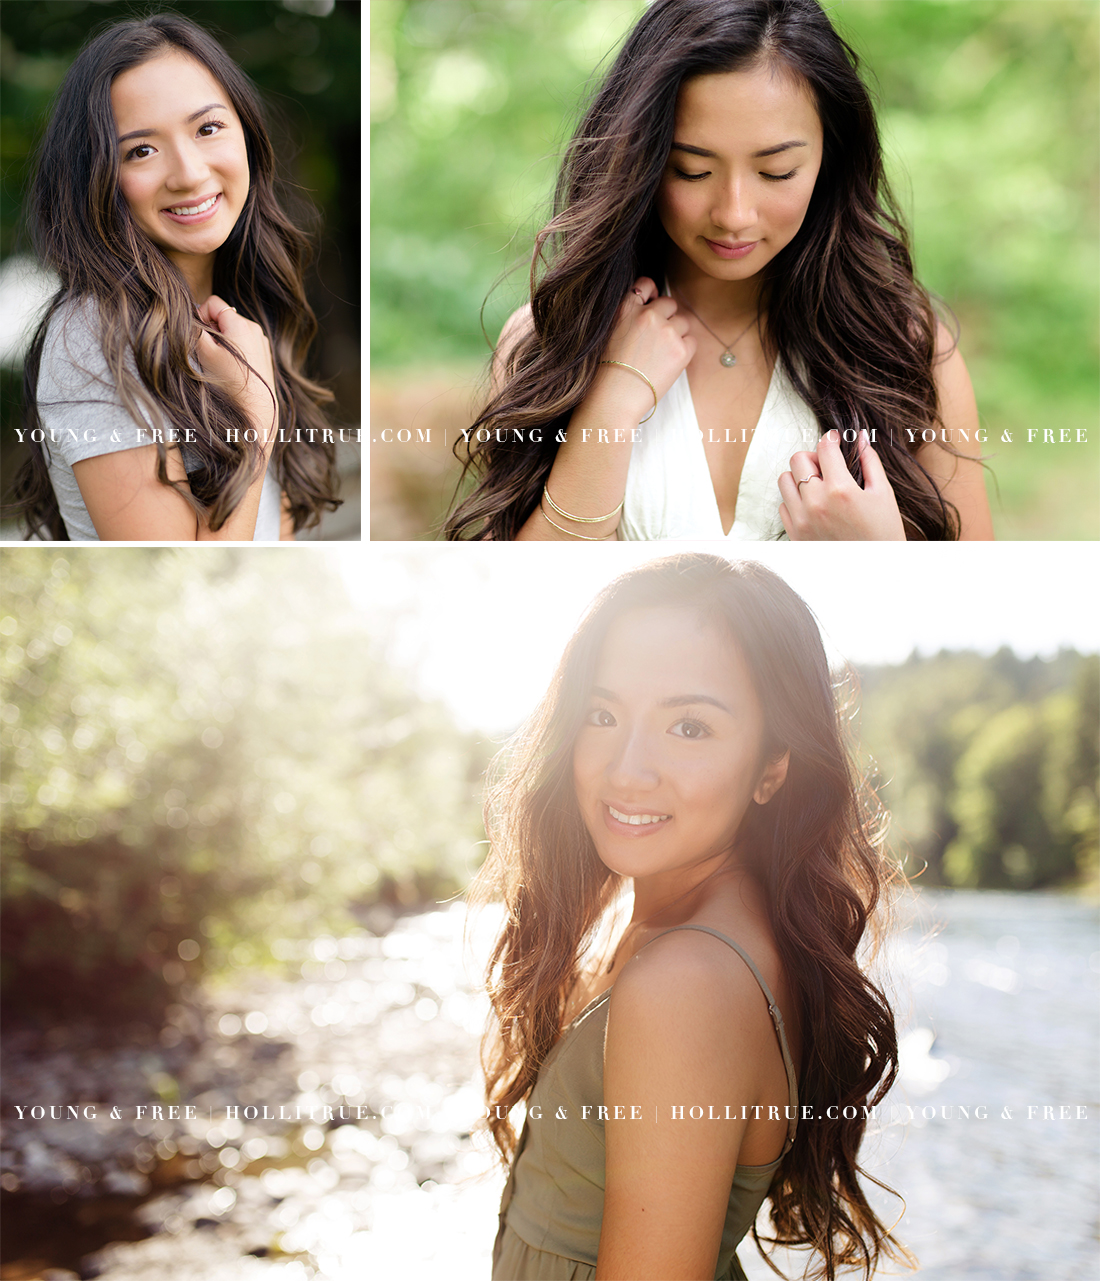 Beautiful sunset Portland Senior Session in at a natural park and in a river by Oregon Senior Portrait Photographer, Holli True